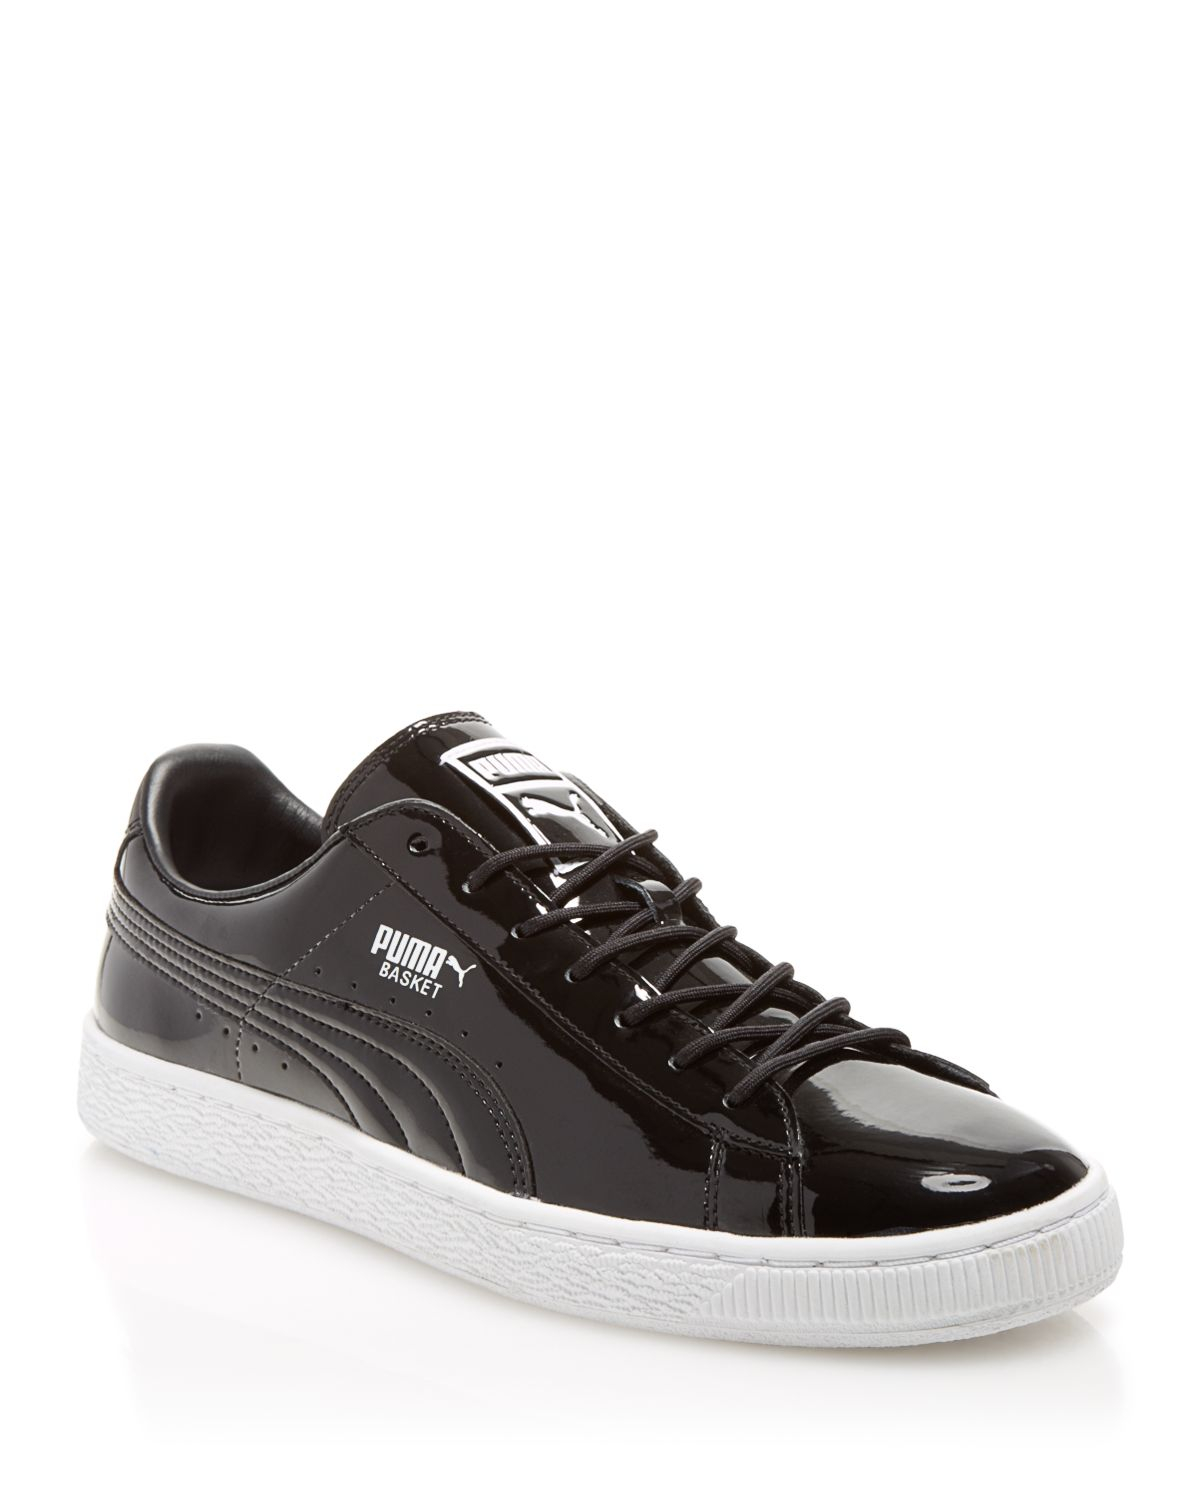 PUMA Basket Patent Leather Sneakers in 